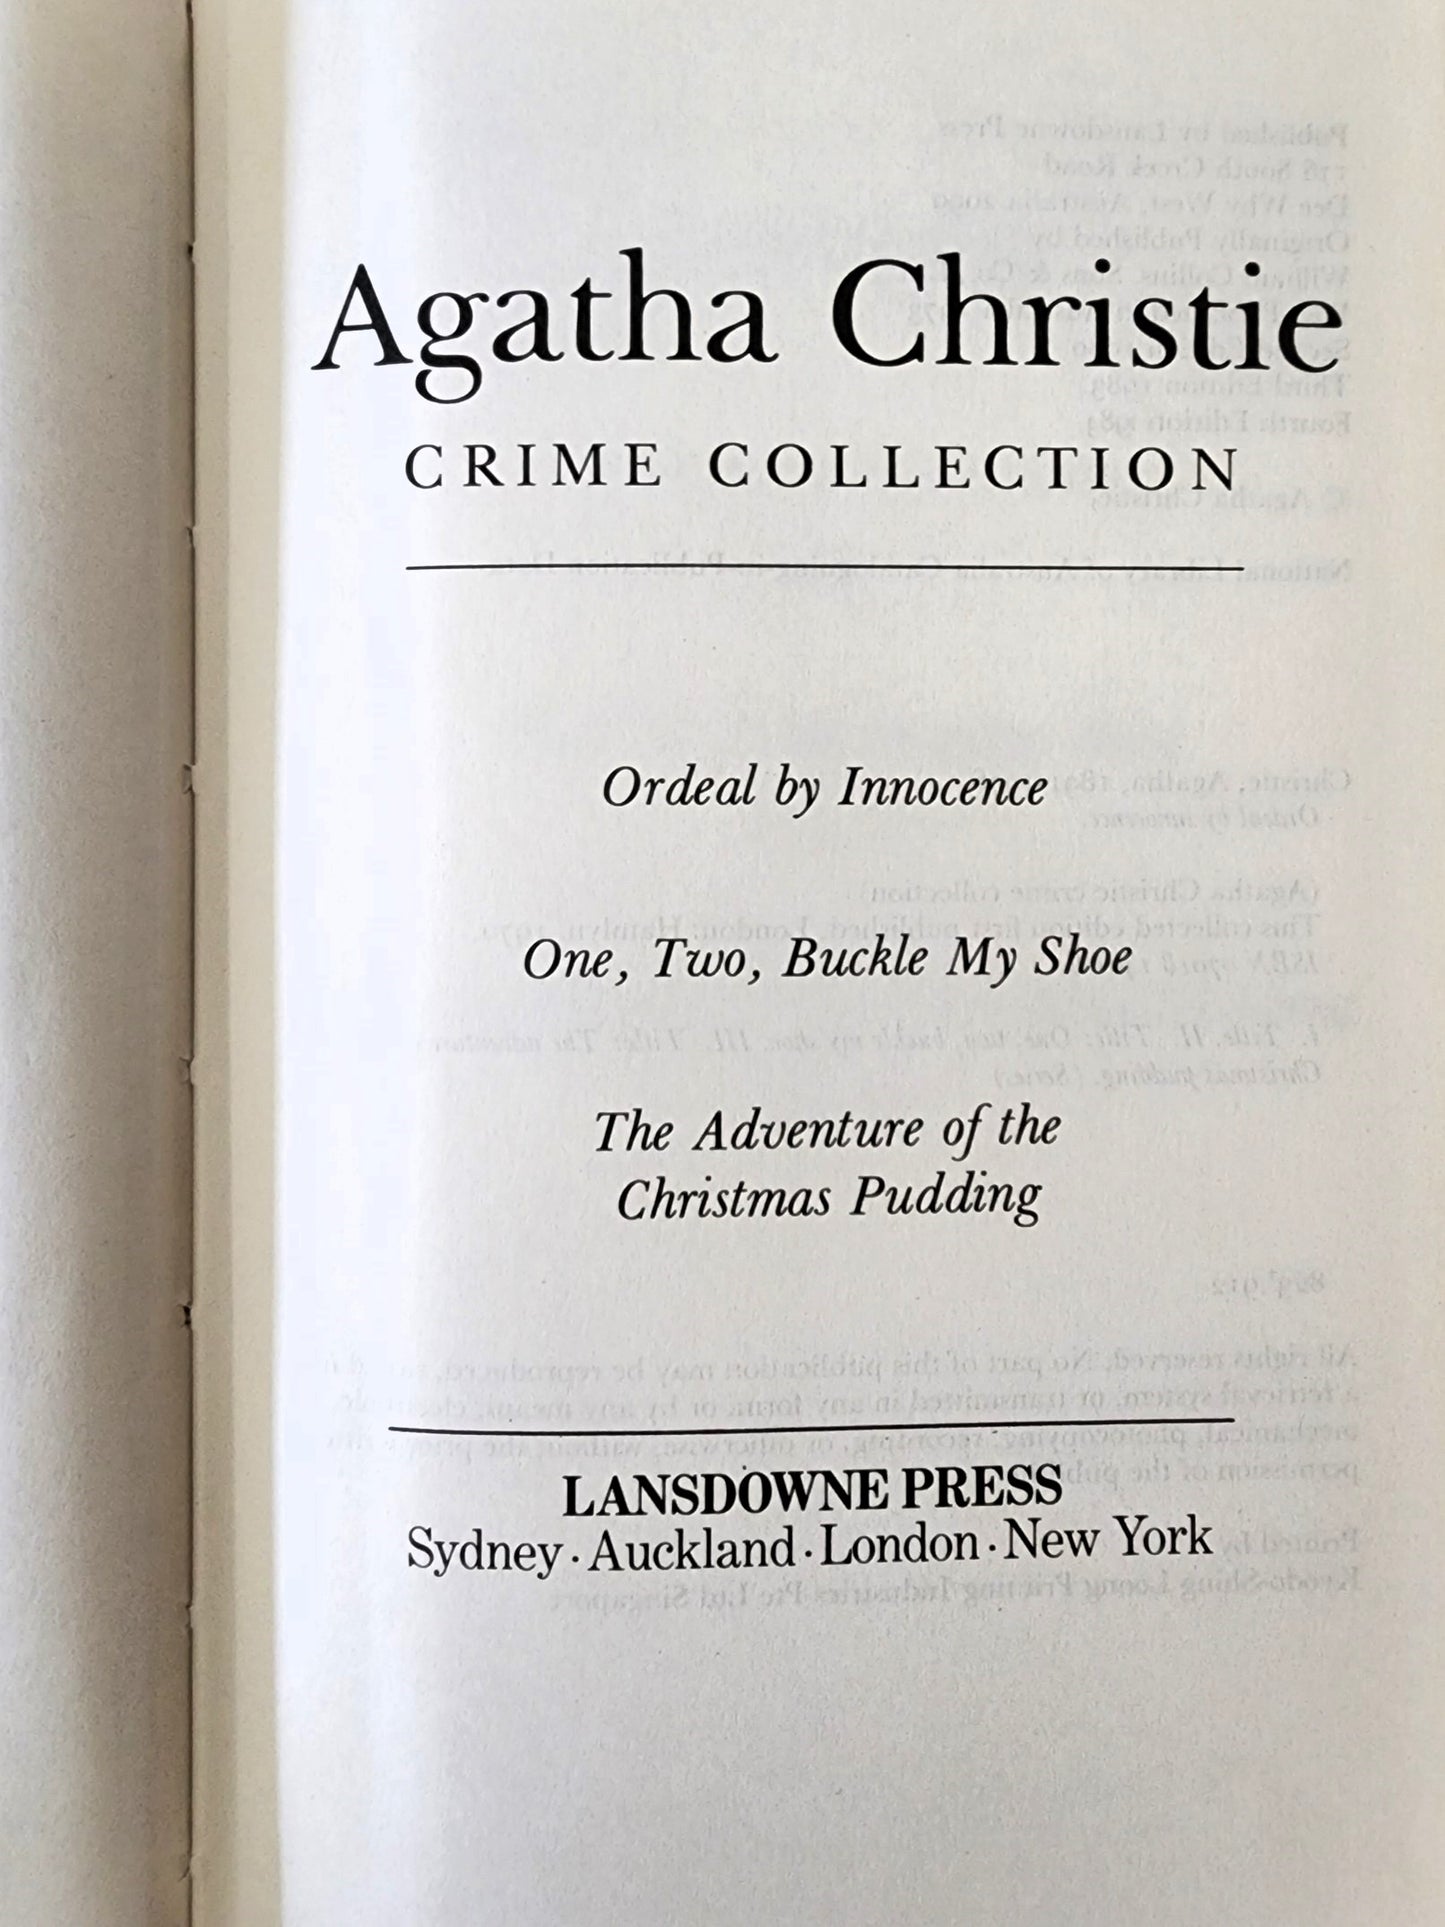 Agatha Christie crime collection (Full Set of 24)